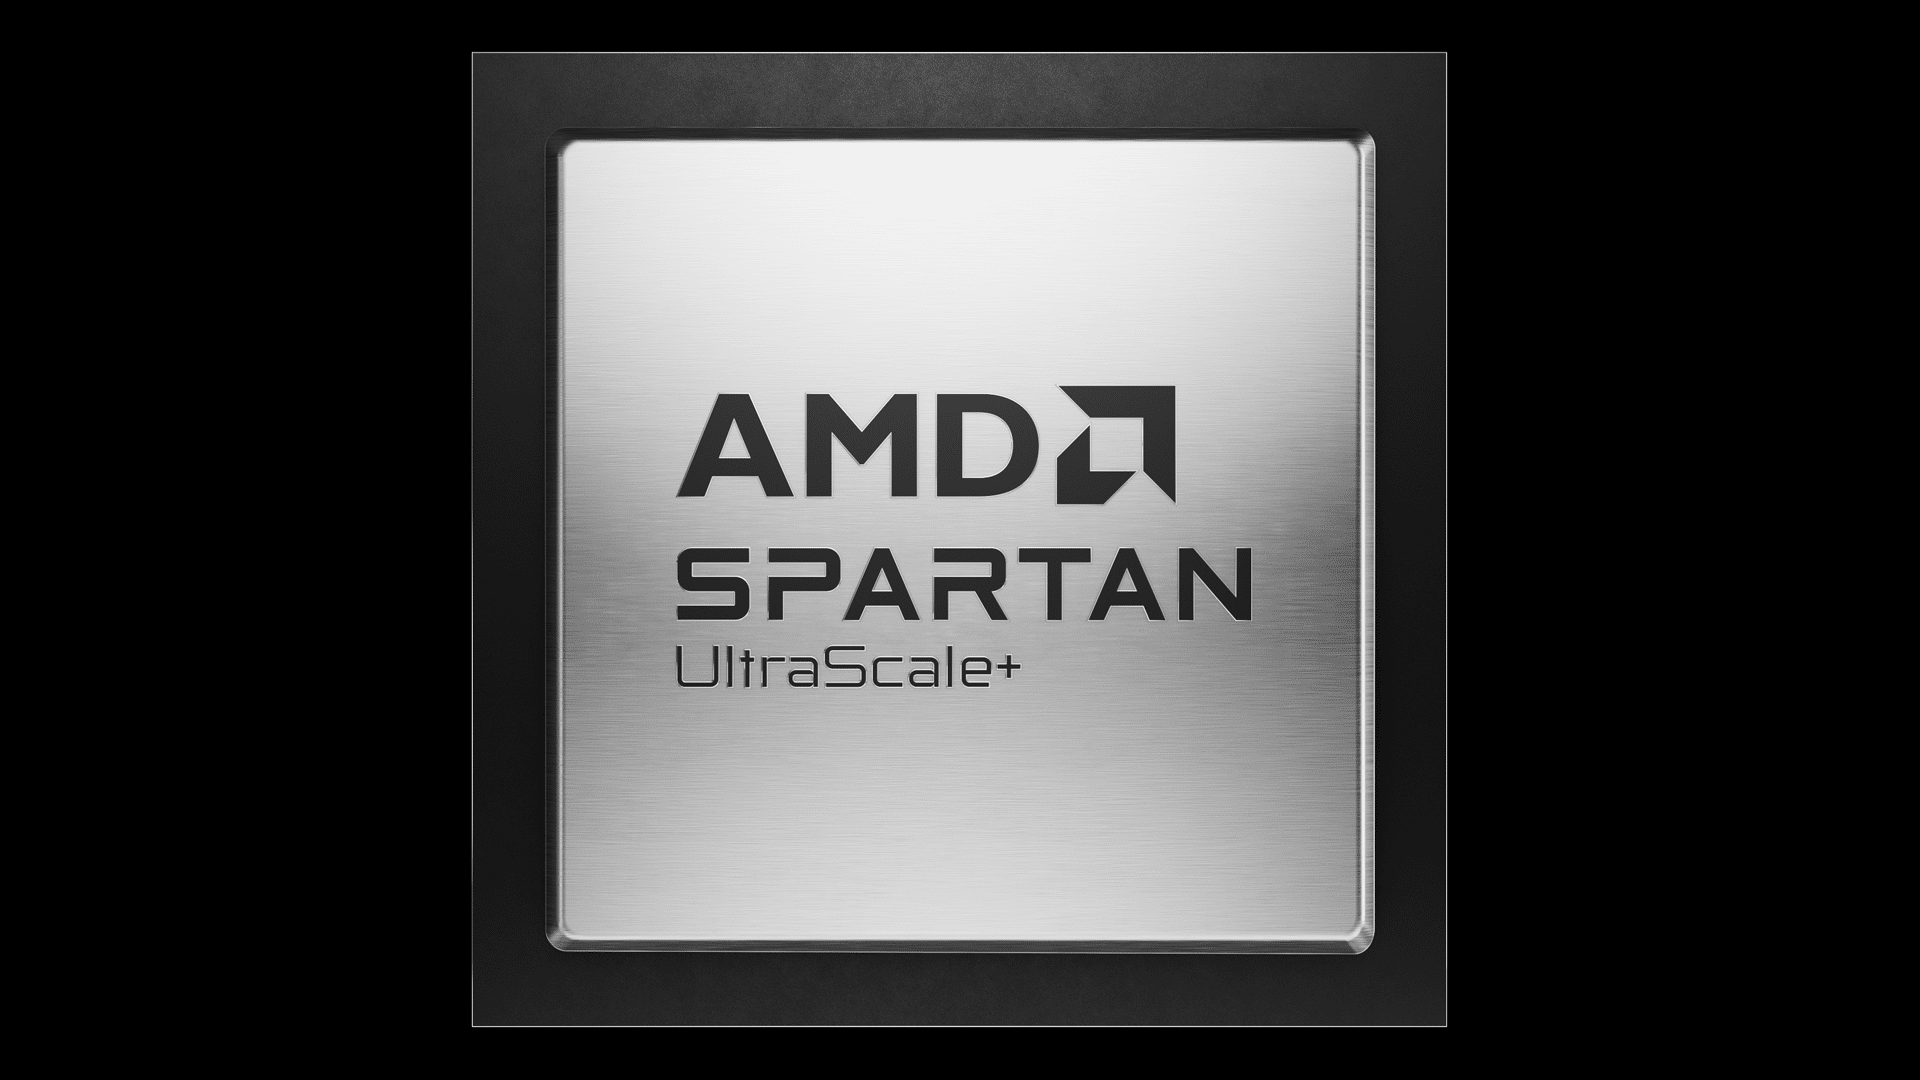 AMD Xilinx launches Spartan-7 series of FPGAs